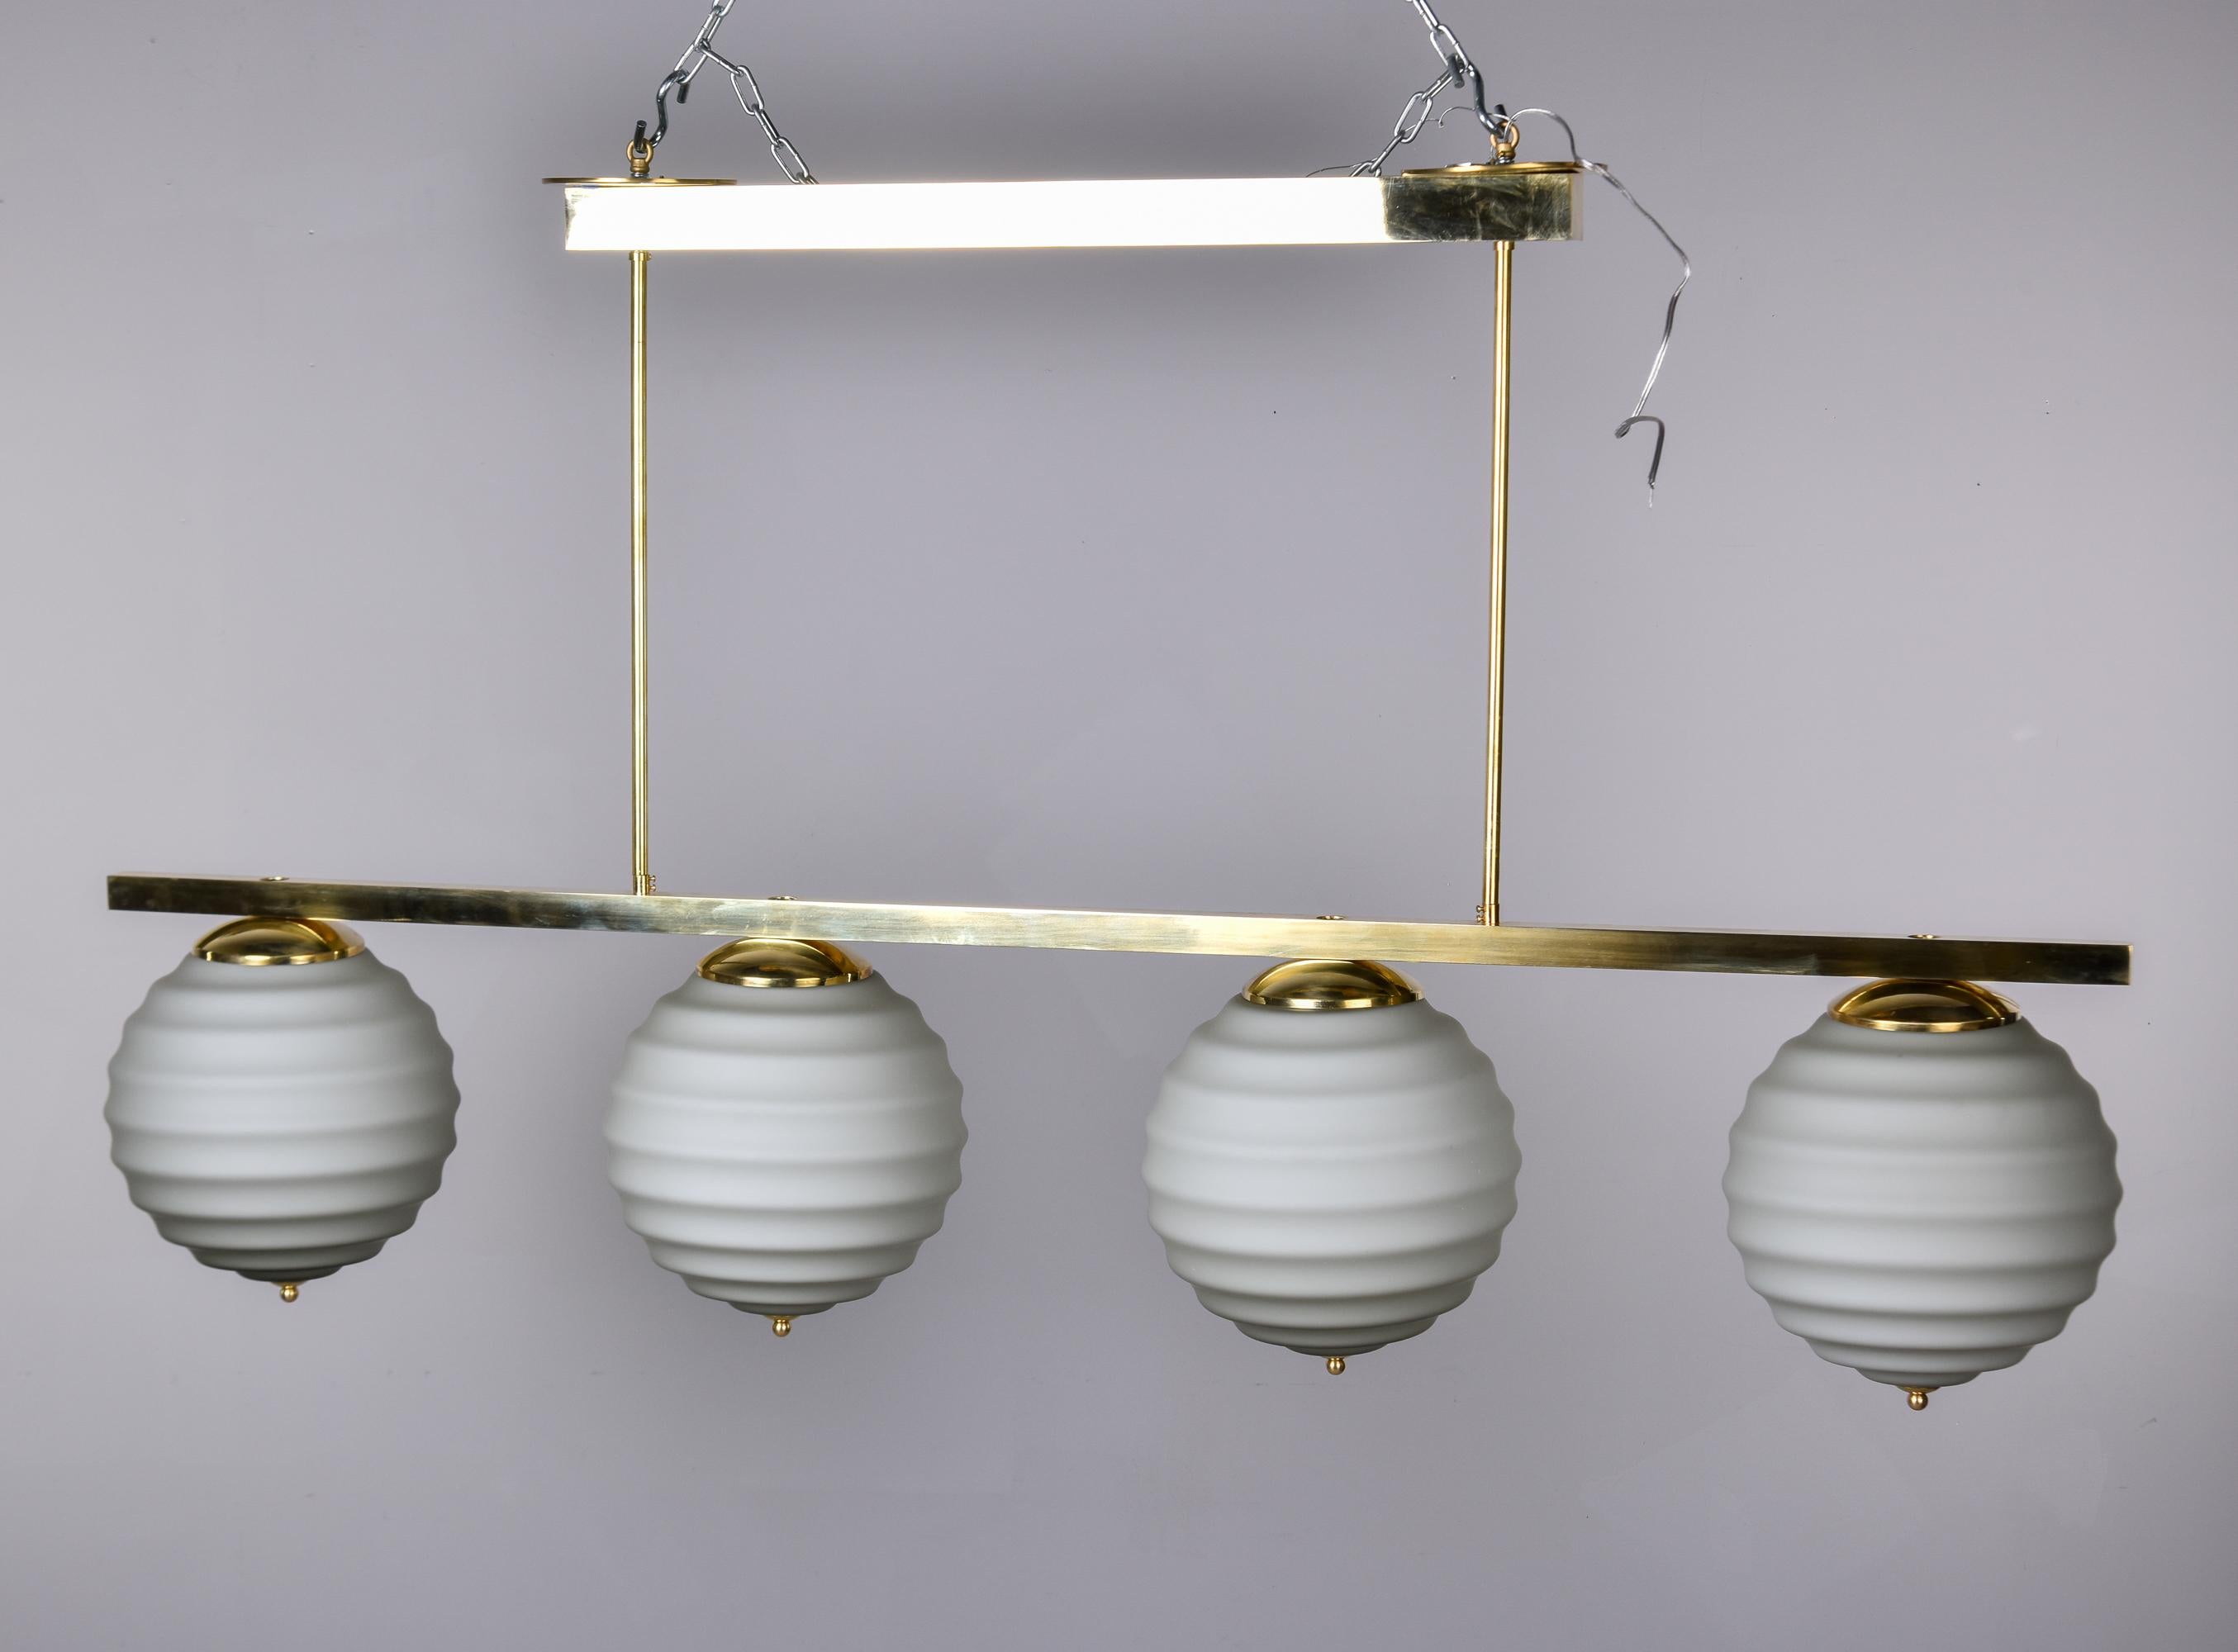 New Italian Fixture with Four Pale Taupe Globes on Horizontal Brass Bar For Sale 4